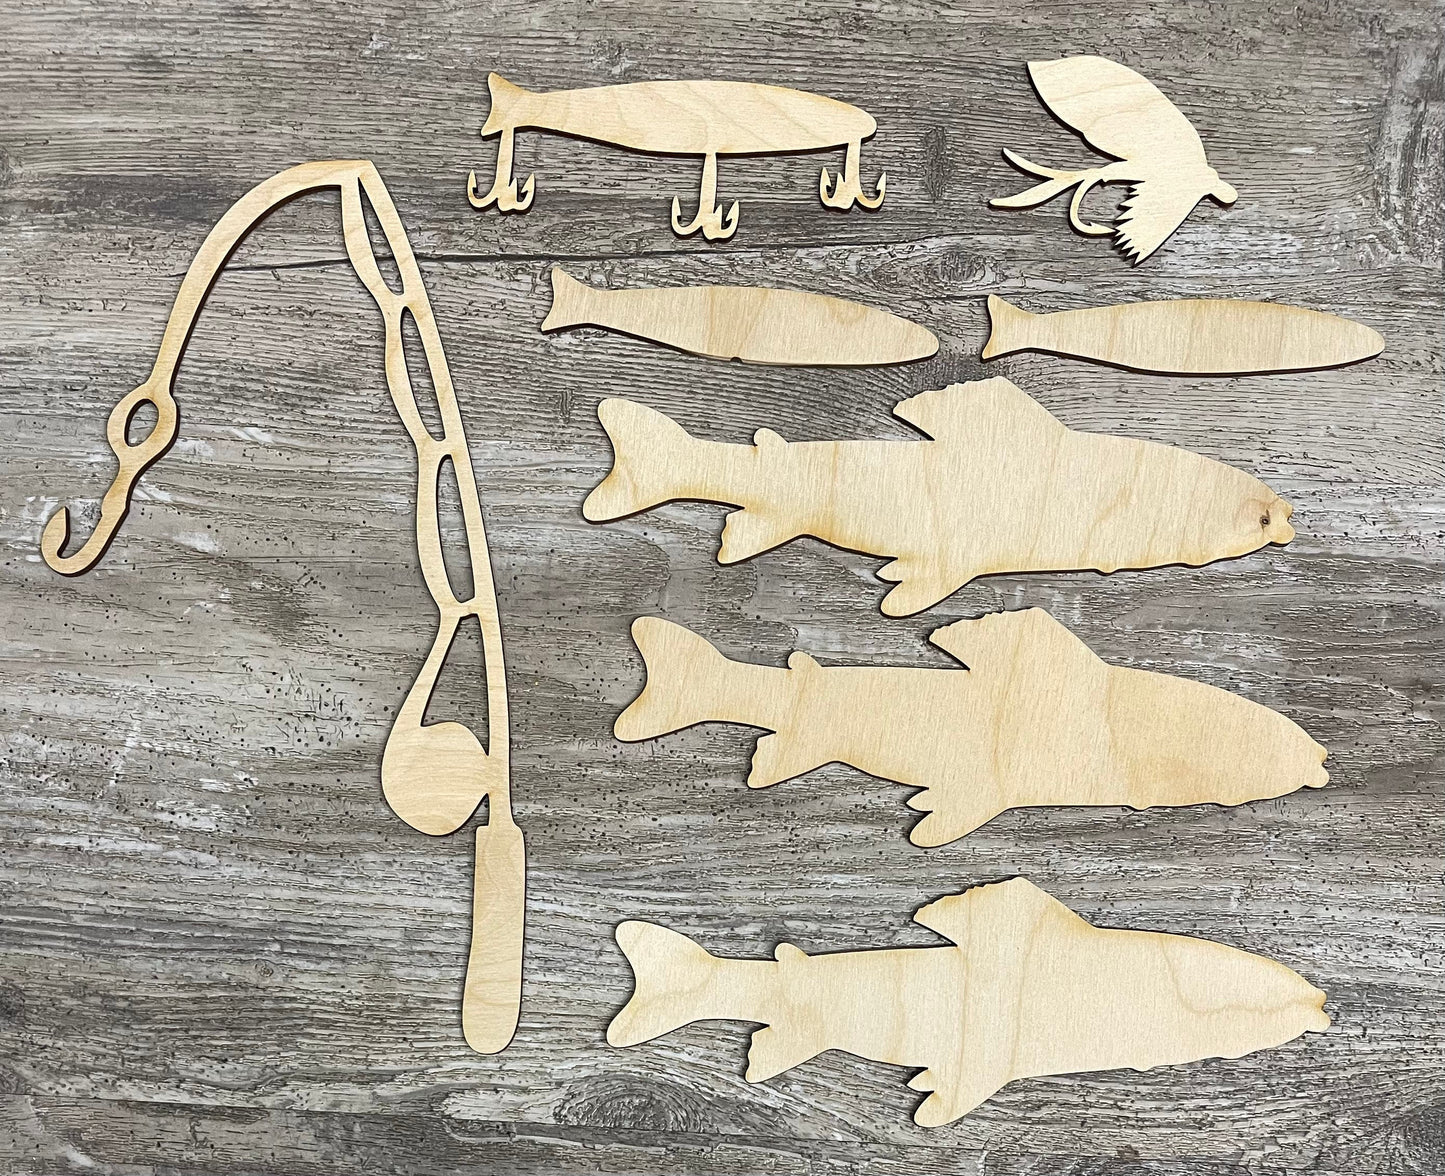 Fishing Rules, Fishing cutouts only, unpainted wooden cutouts, fishing rod, 2 lures and 5 fish cutouts